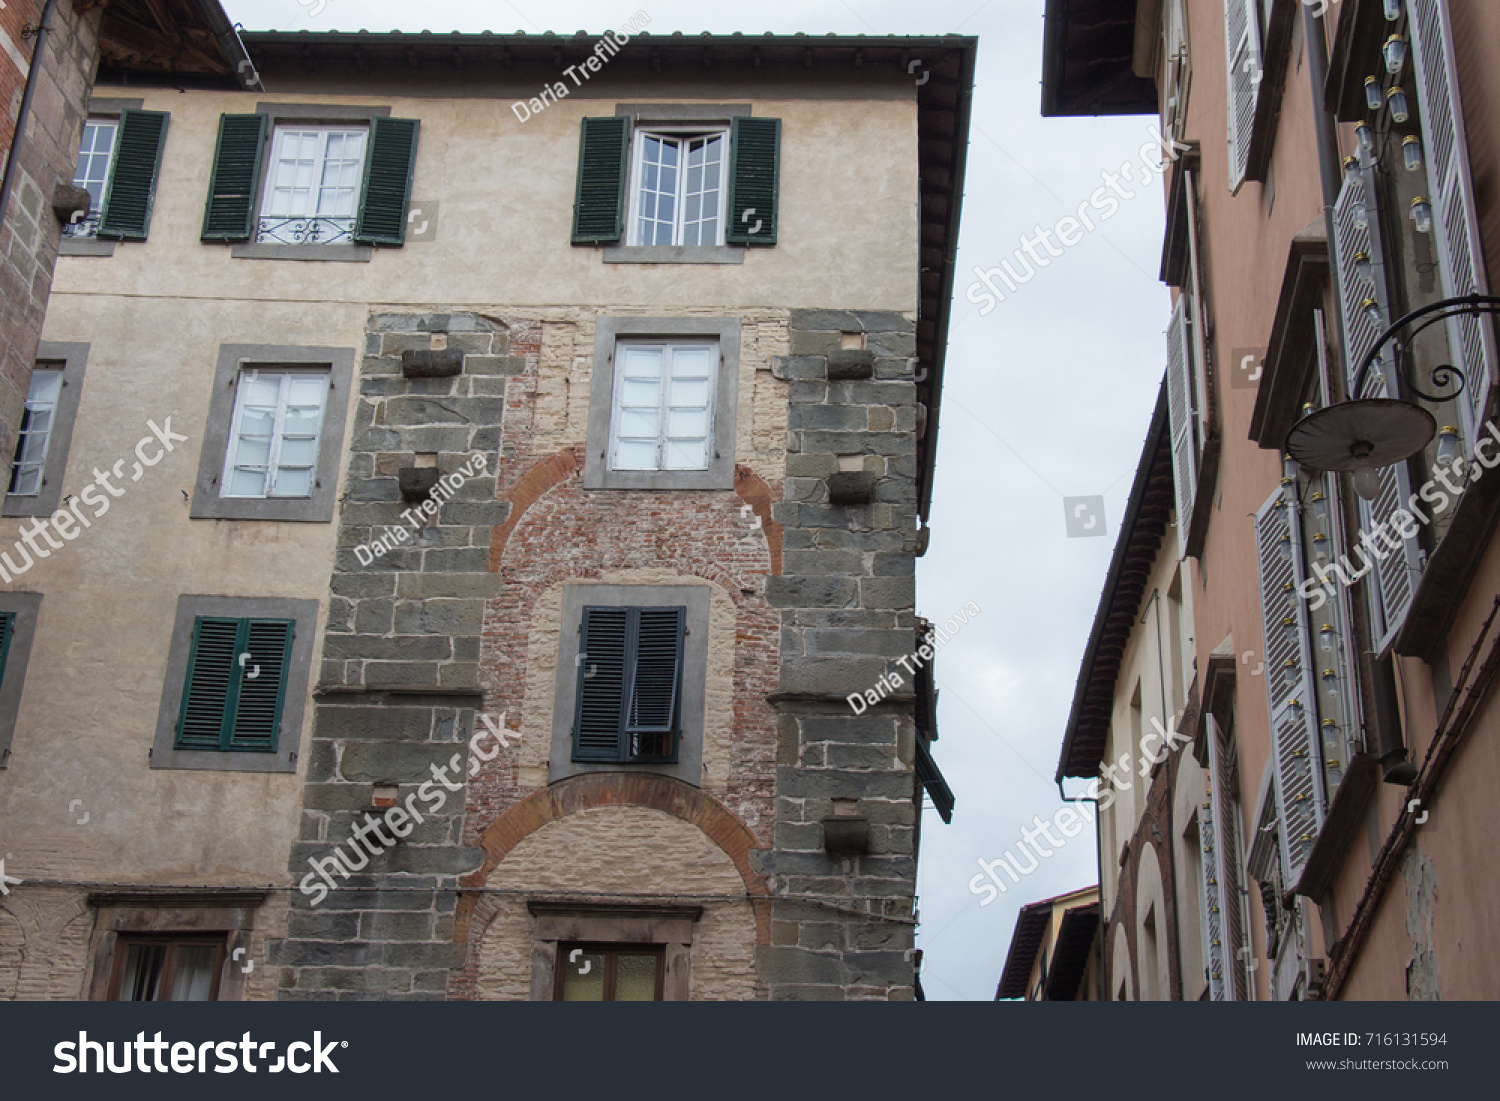 Italy, Lucca - September 18 2016: the detailed view of old building in Lucca   #716131594